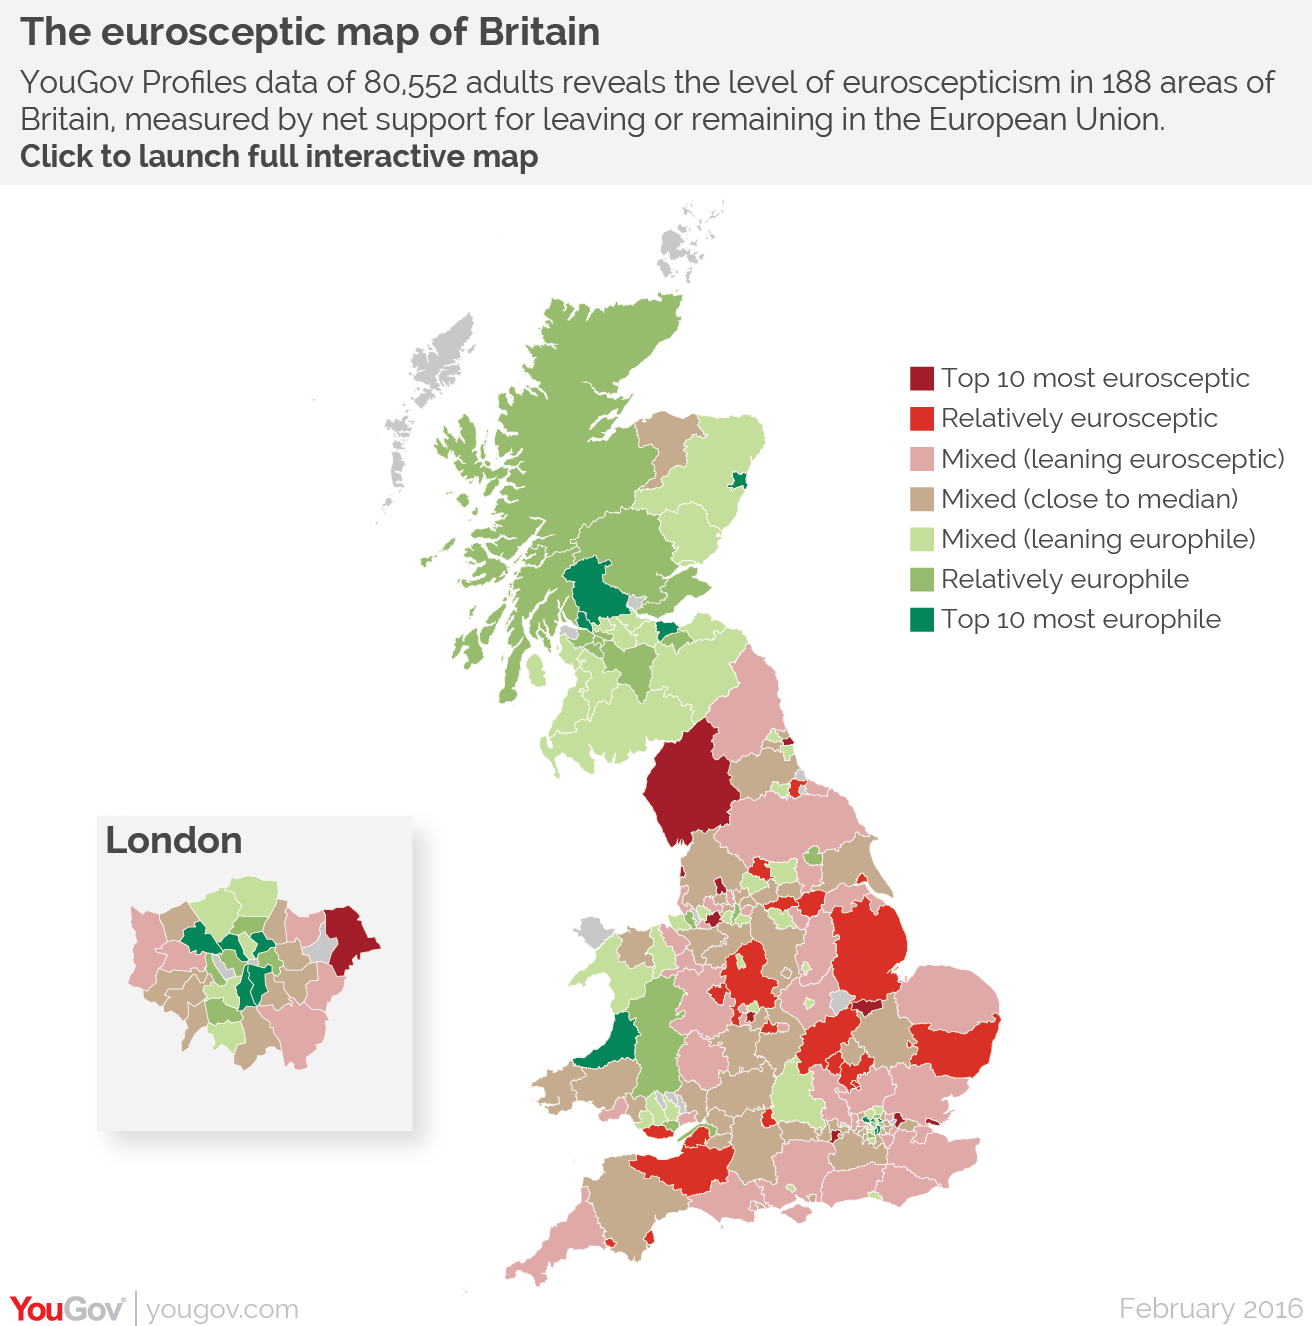 Map Uk Referendum Vote New YouGov Profiles research of over 80,000 people reveals the most and least Eurosceptic areas of Britain